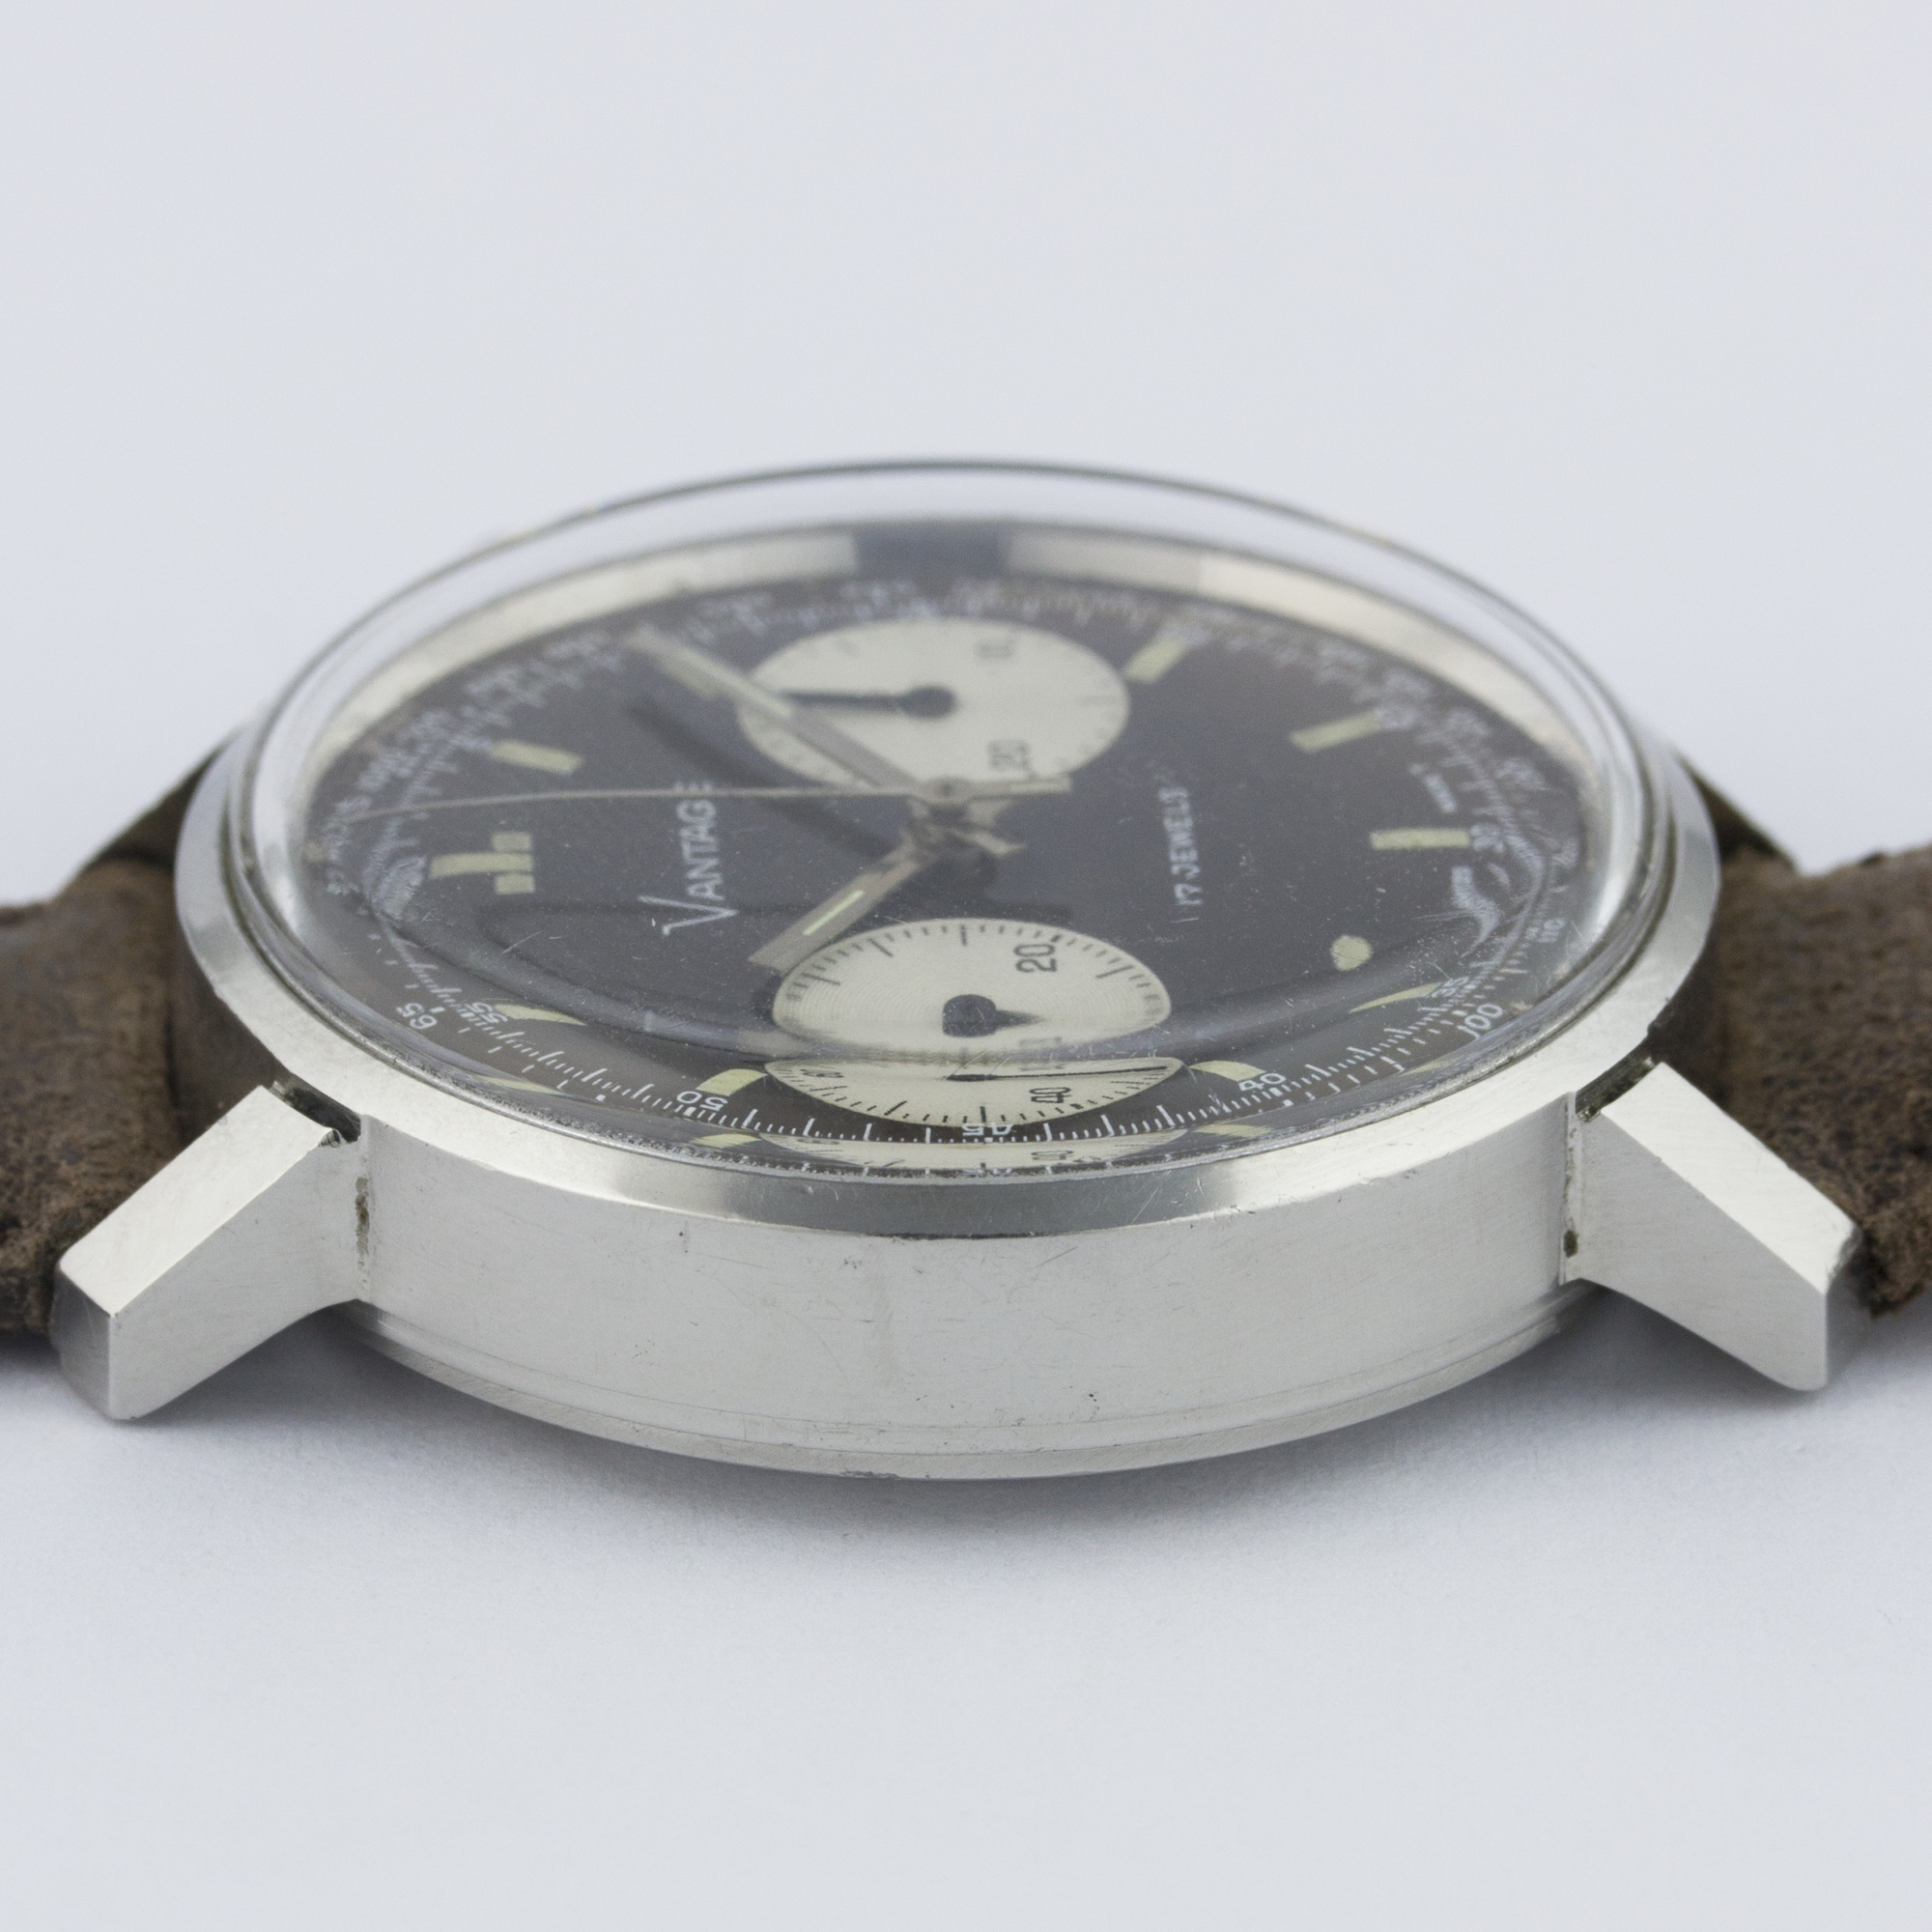 A GENTLEMAN’S STAINLESS STEEL VANTAGE CHRONOGRAPH WRIST WATCH CIRCA 1970 WITH "CHOCOLATE" DIAL D: - Image 8 of 8